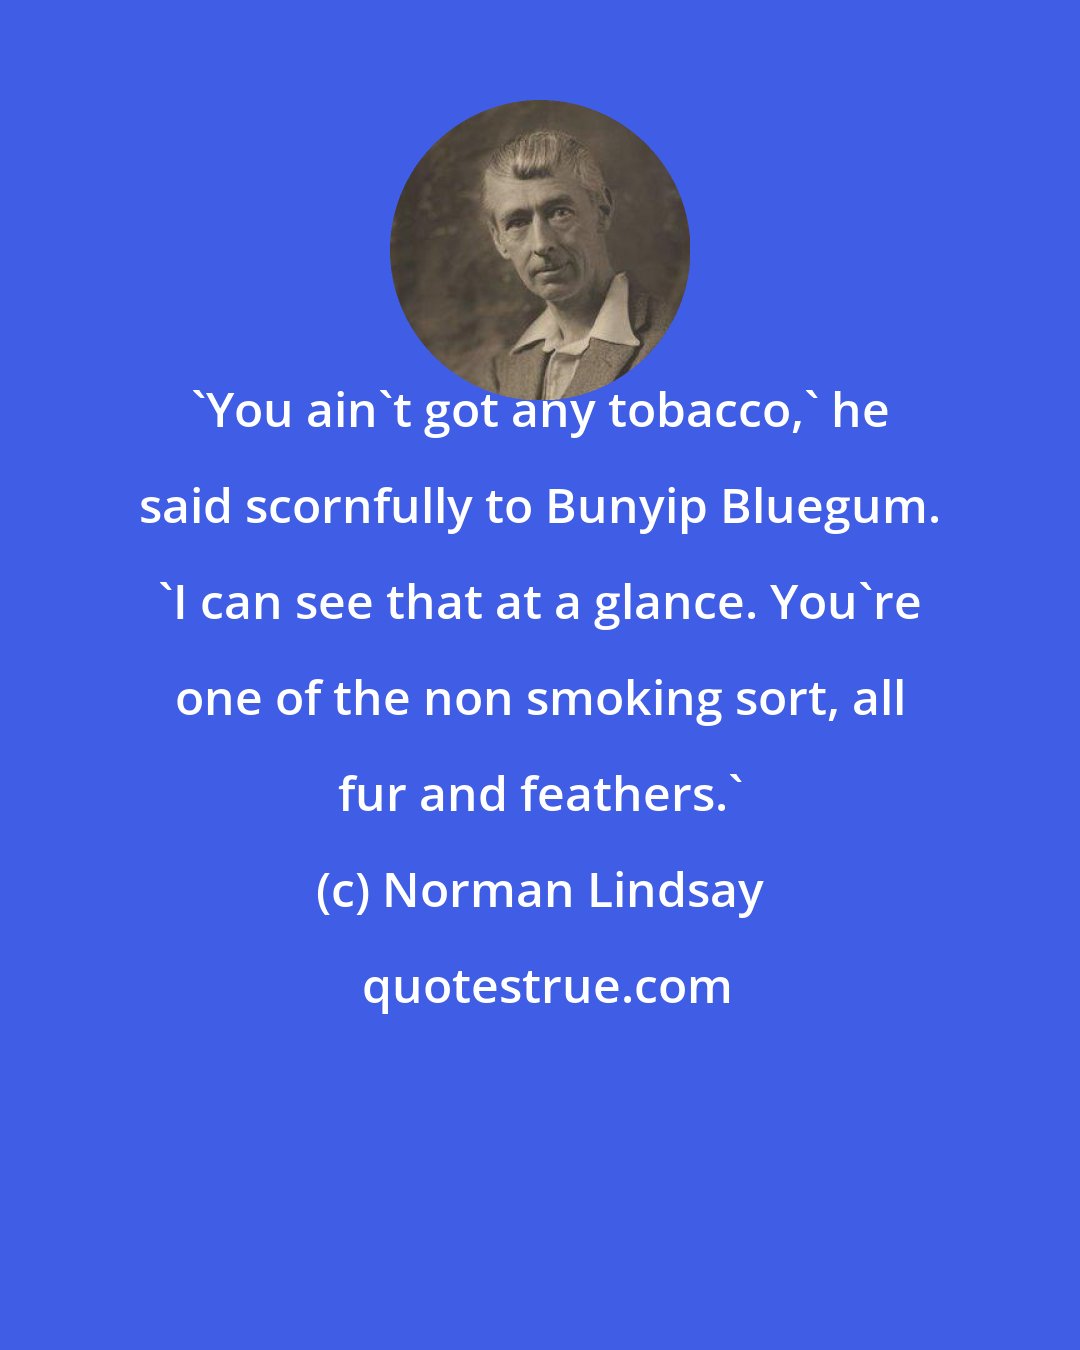 Norman Lindsay: 'You ain't got any tobacco,' he said scornfully to Bunyip Bluegum. 'I can see that at a glance. You're one of the non smoking sort, all fur and feathers.'